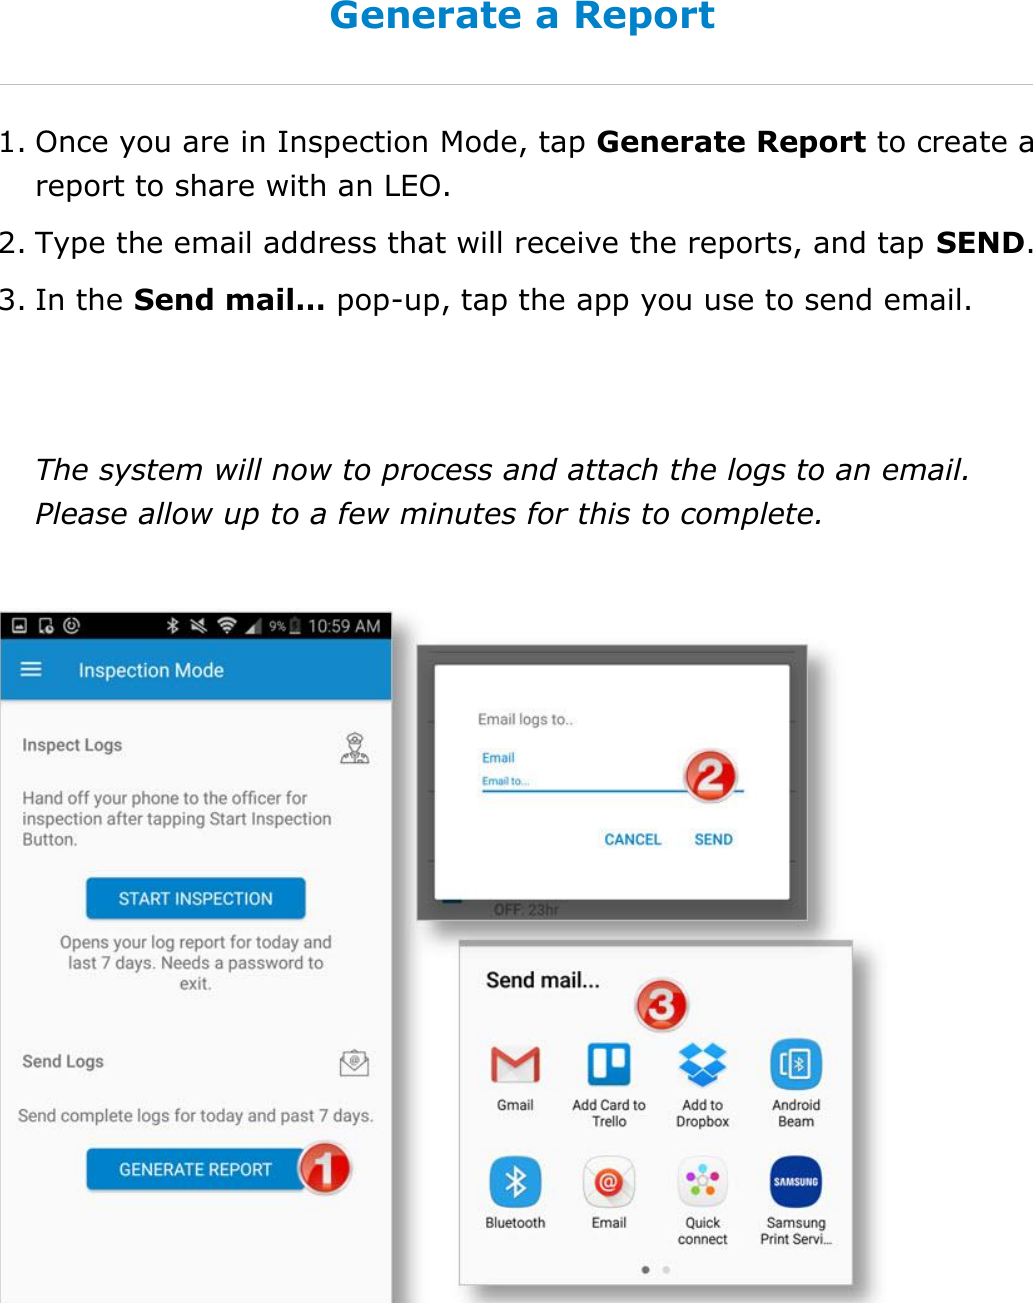 Use Inspection Mode DriverConnect User Guide  64 © 2016-2017, Rand McNally, Inc. Generate a Report 1. Once you are in Inspection Mode, tap Generate Report to create a report to share with an LEO. 2. Type the email address that will receive the reports, and tap SEND. 3. In the Send mail… pop-up, tap the app you use to send email.   The system will now to process and attach the logs to an email. Please allow up to a few minutes for this to complete.    